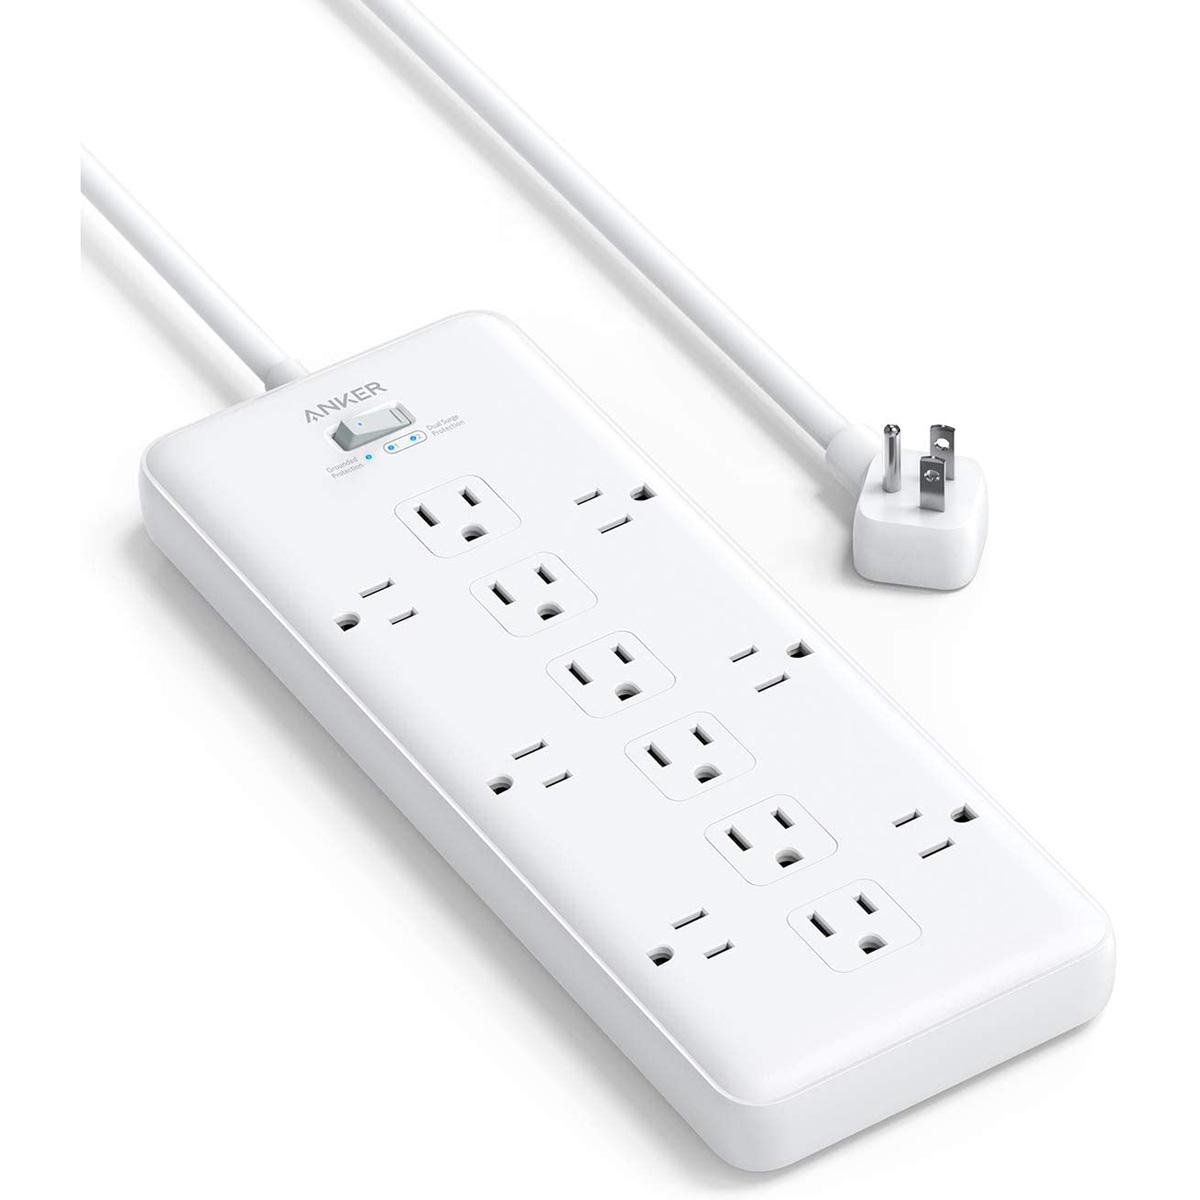 Anker Power Strip Surge Protector with 12 Outlets for $21.99